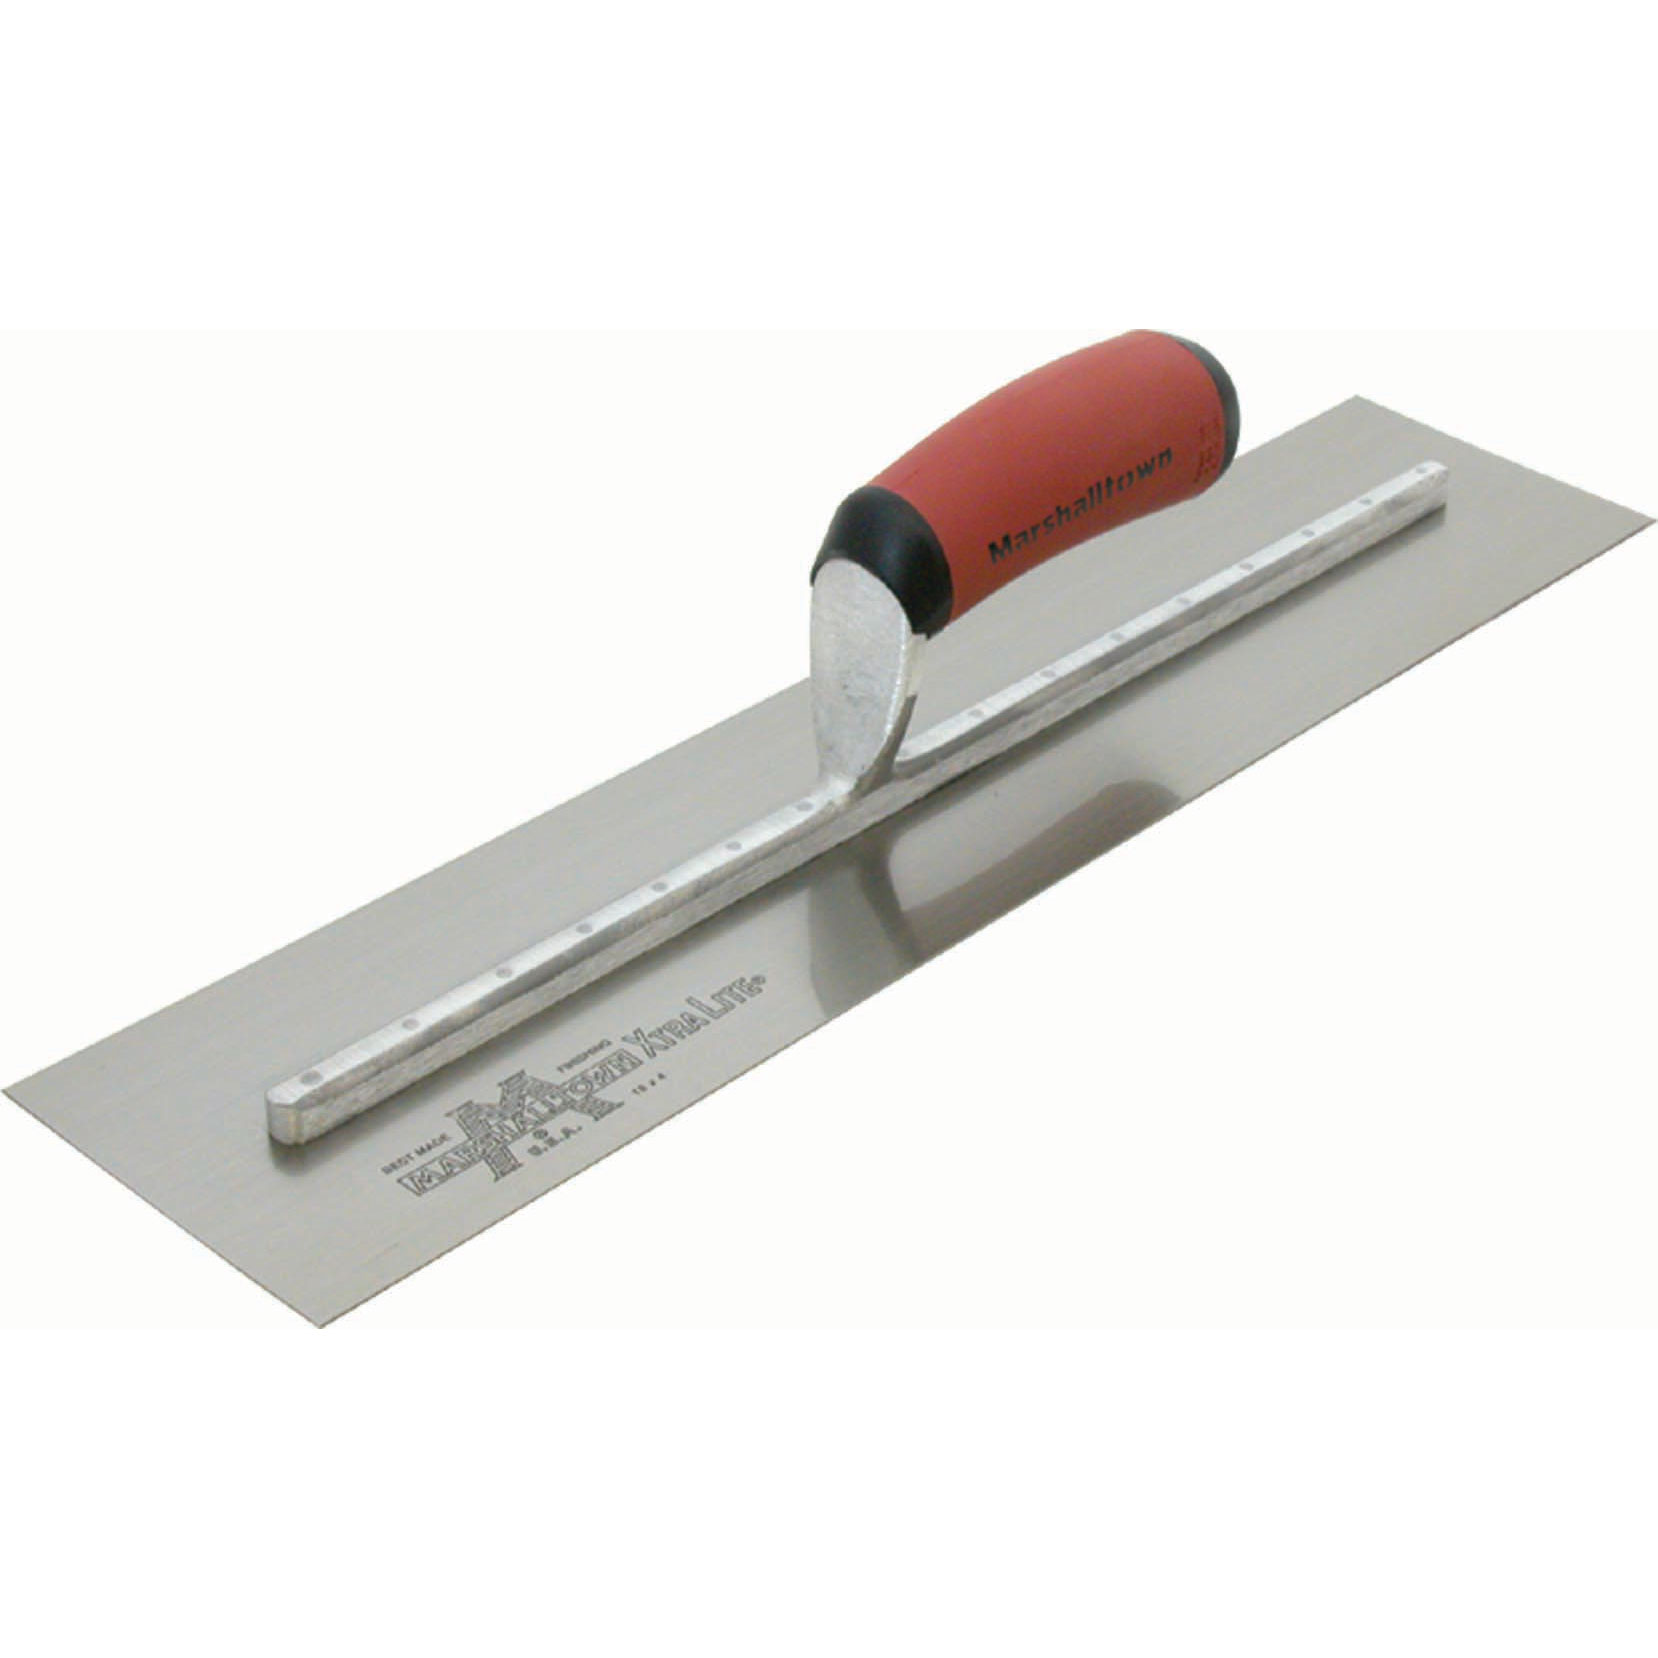 Marshalltown MXS81D 18in. x 4in. Finishing Trowel Curved DuraSoft Handle MAT-MXS81D